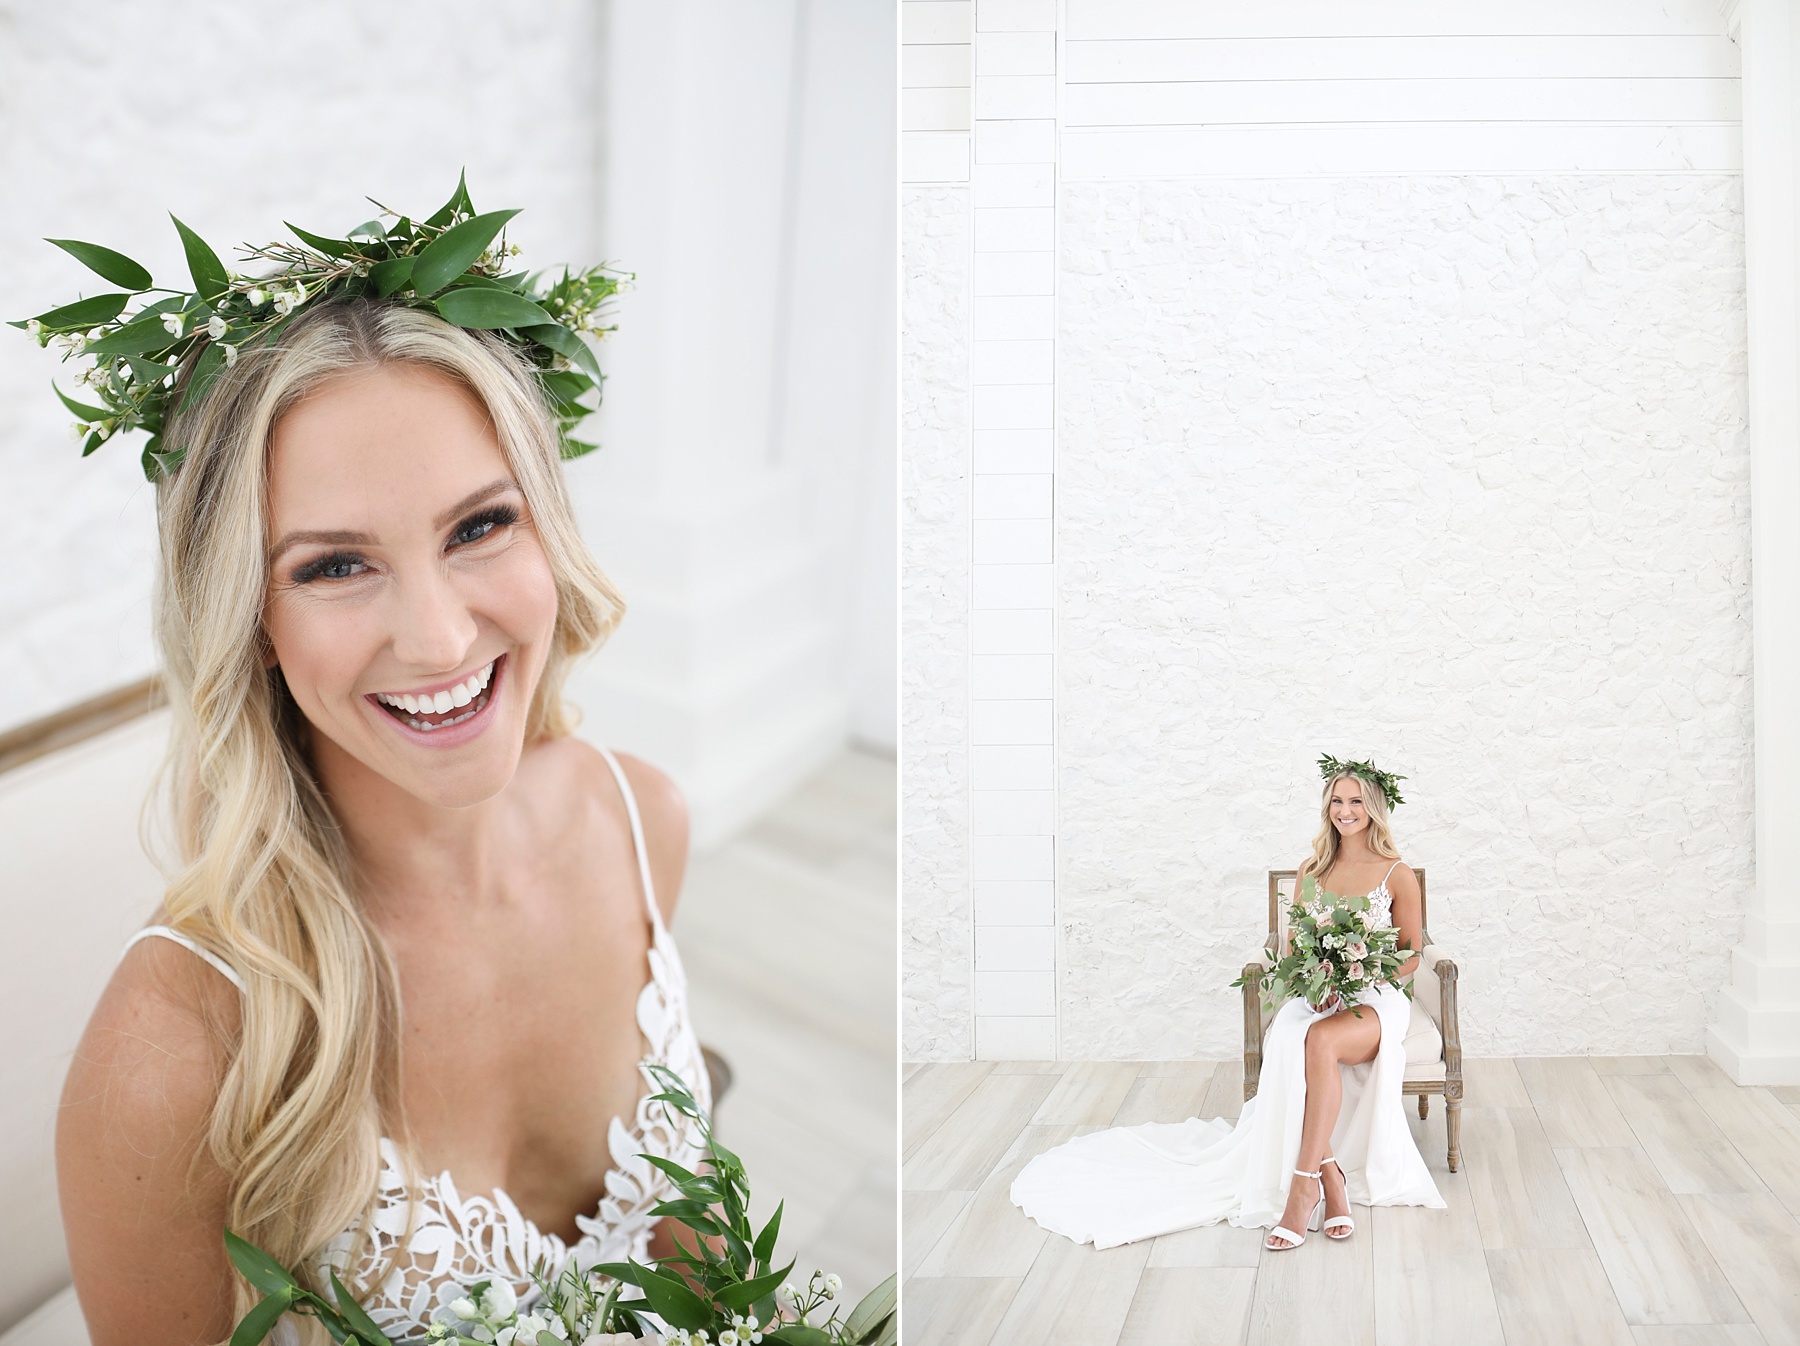 bride laughs during bridal portraits while wearing flower crown photographed by Randi Michelle